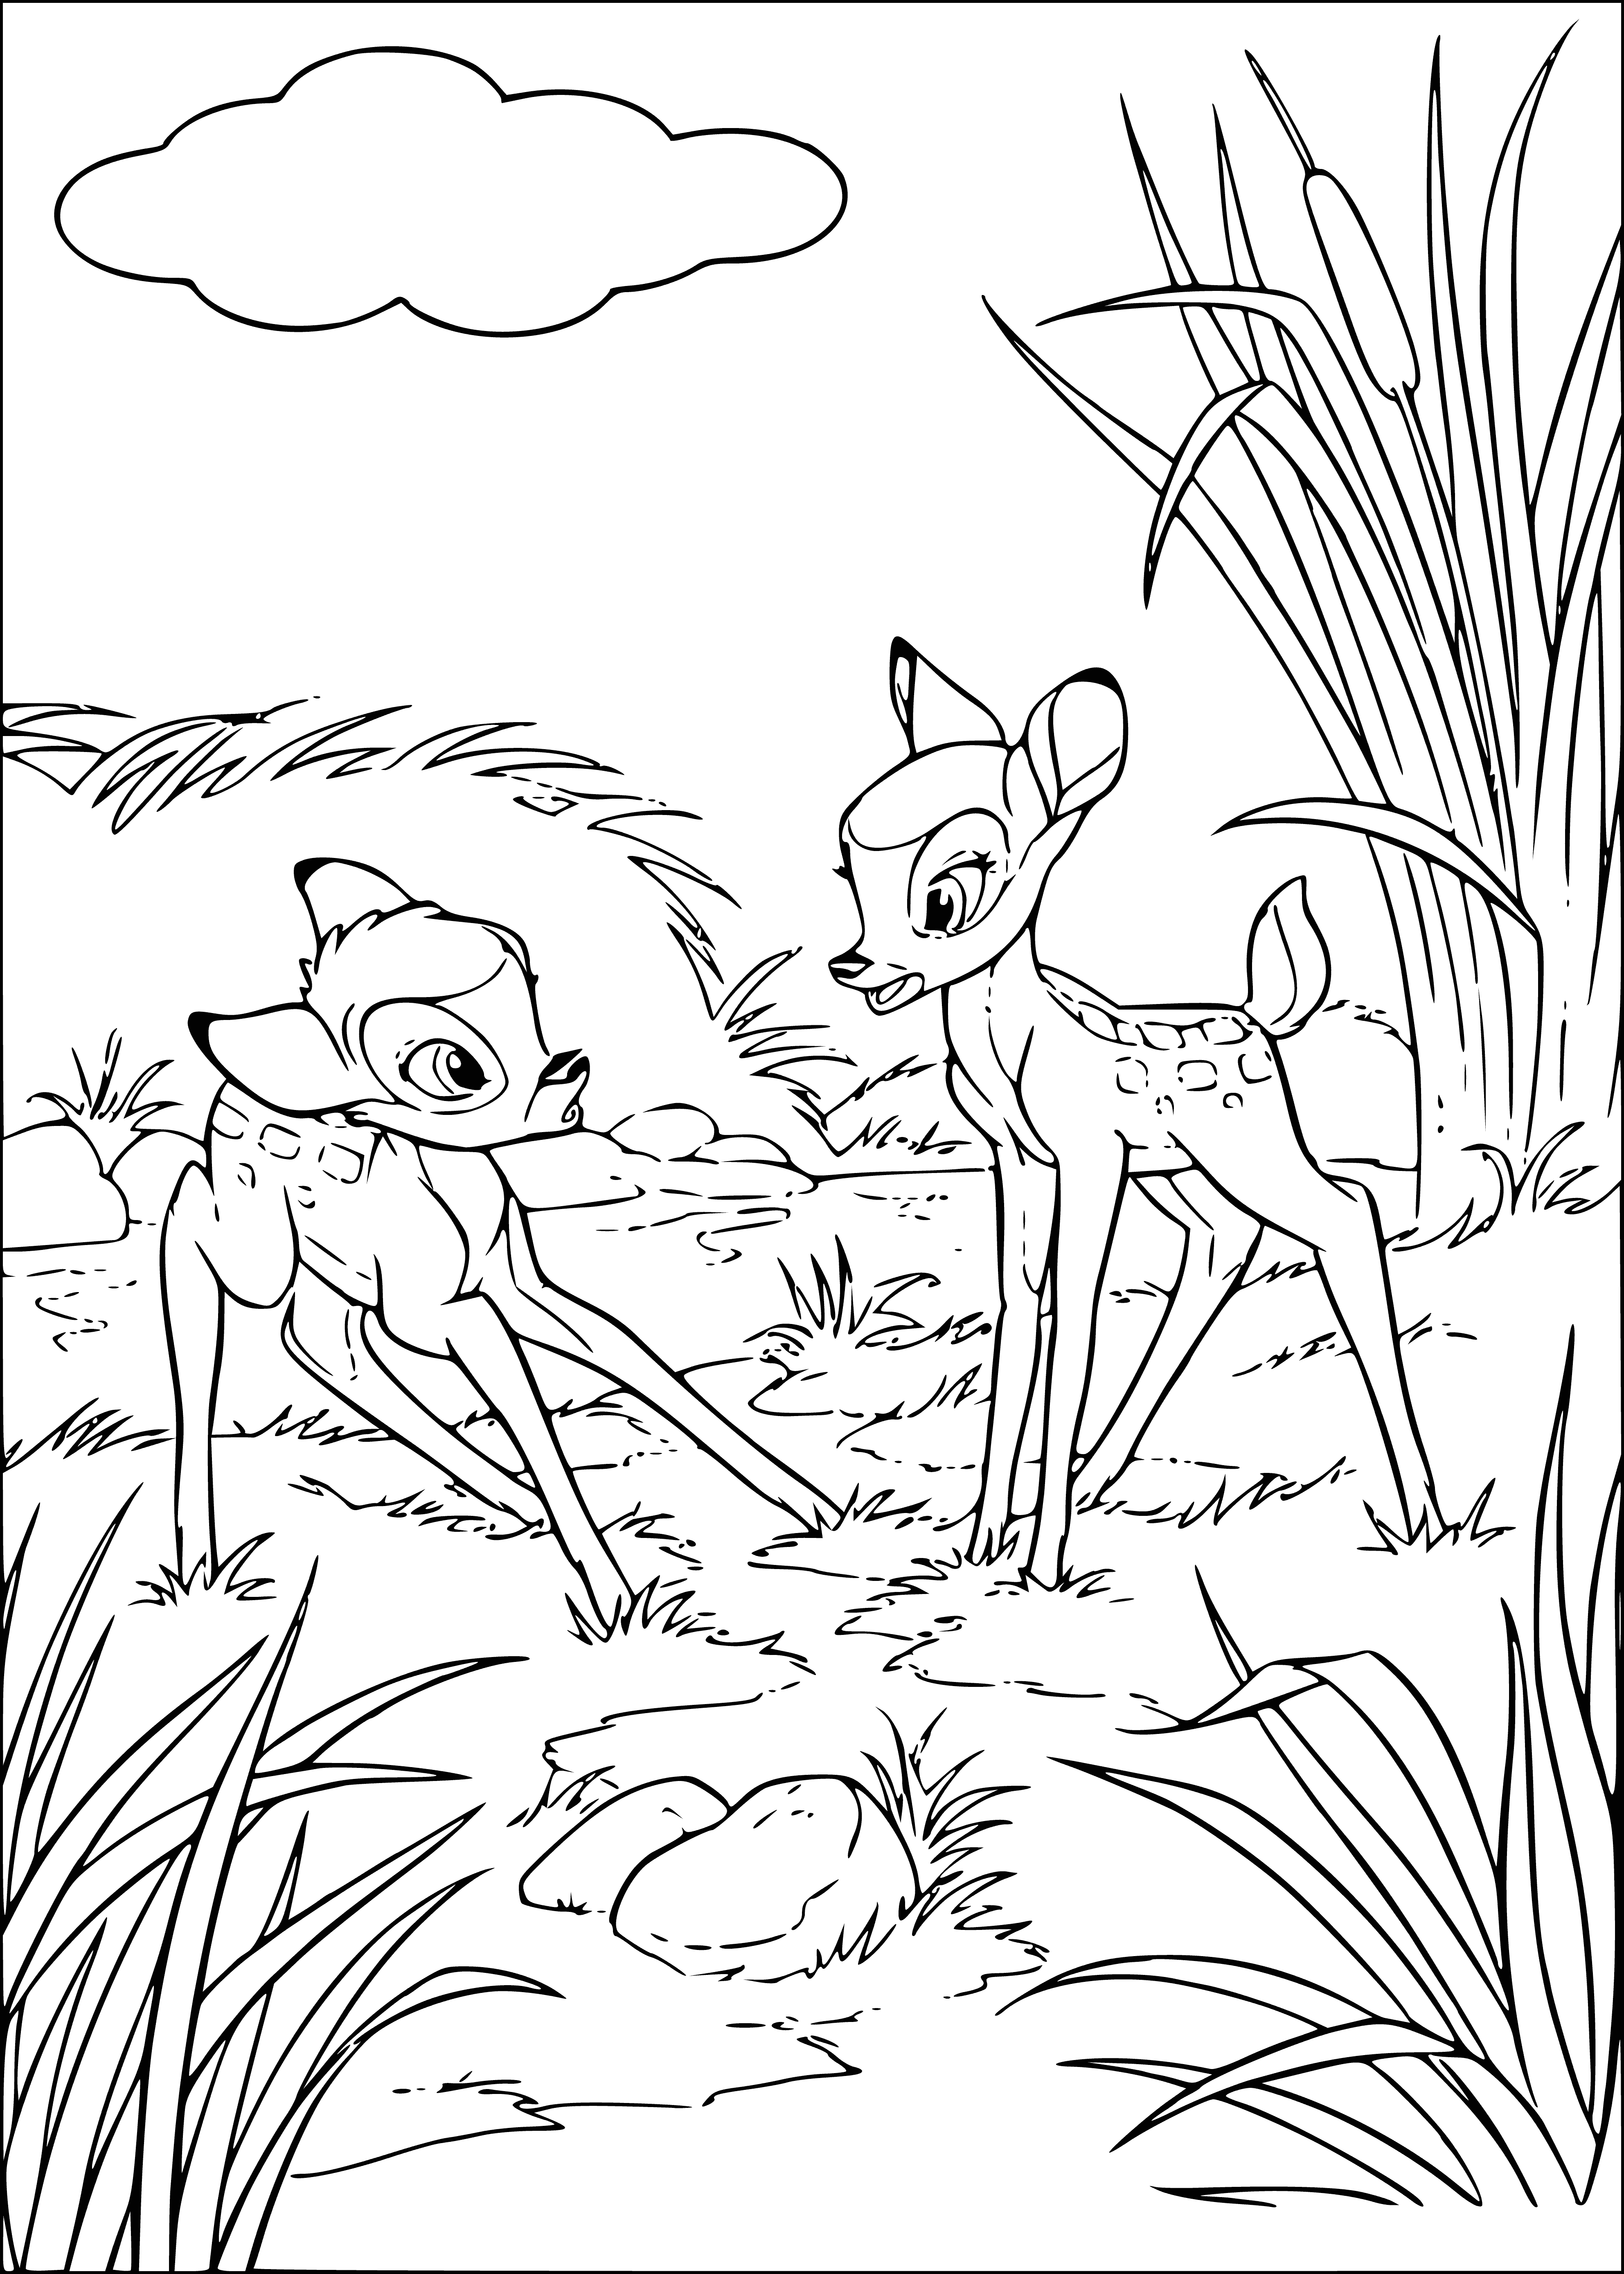 New friend coloring page